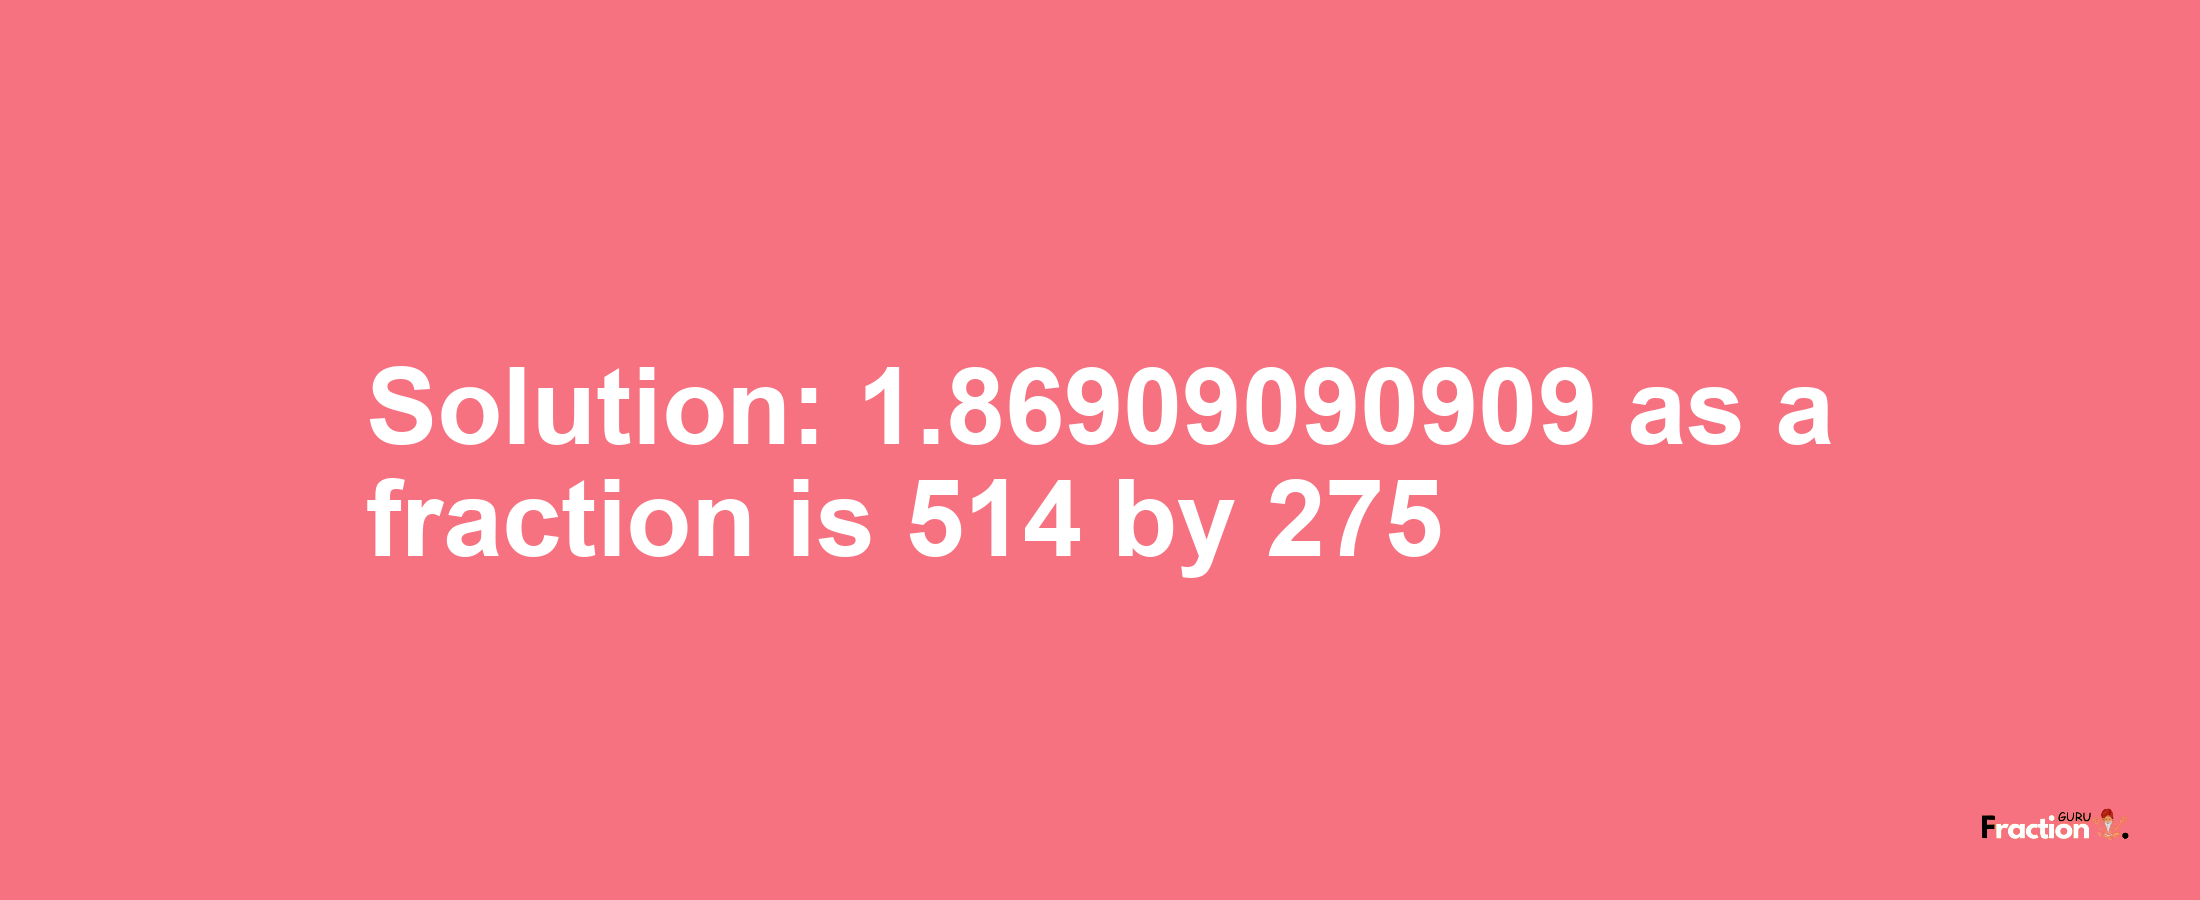 Solution:1.86909090909 as a fraction is 514/275